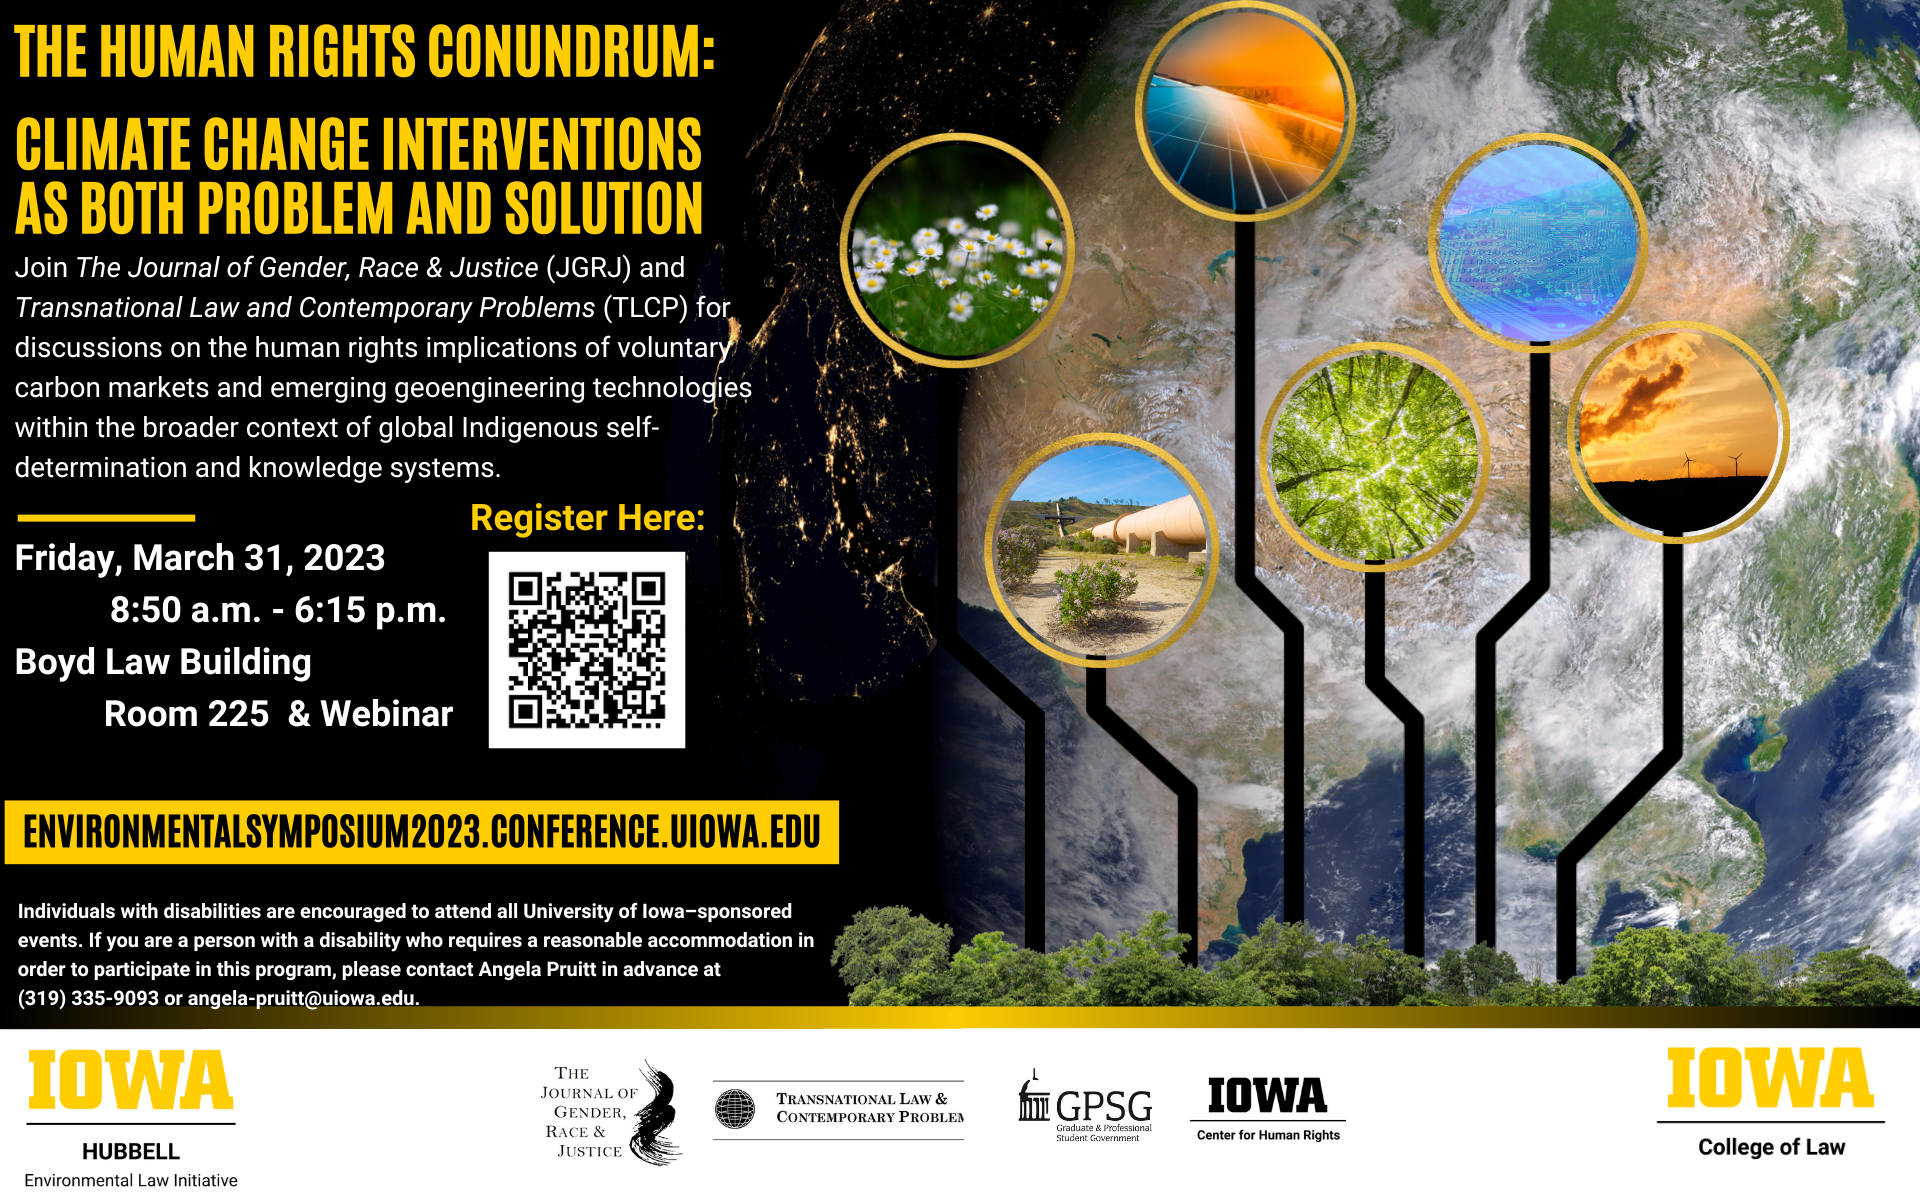 The Human Rights Conundrum: Climate Change Interventions as Both Problem and Solution. Friday, March 31st, 2023 from 8:50 am to 6:15am in the Boyd Law Building Room 225. Webinar available.